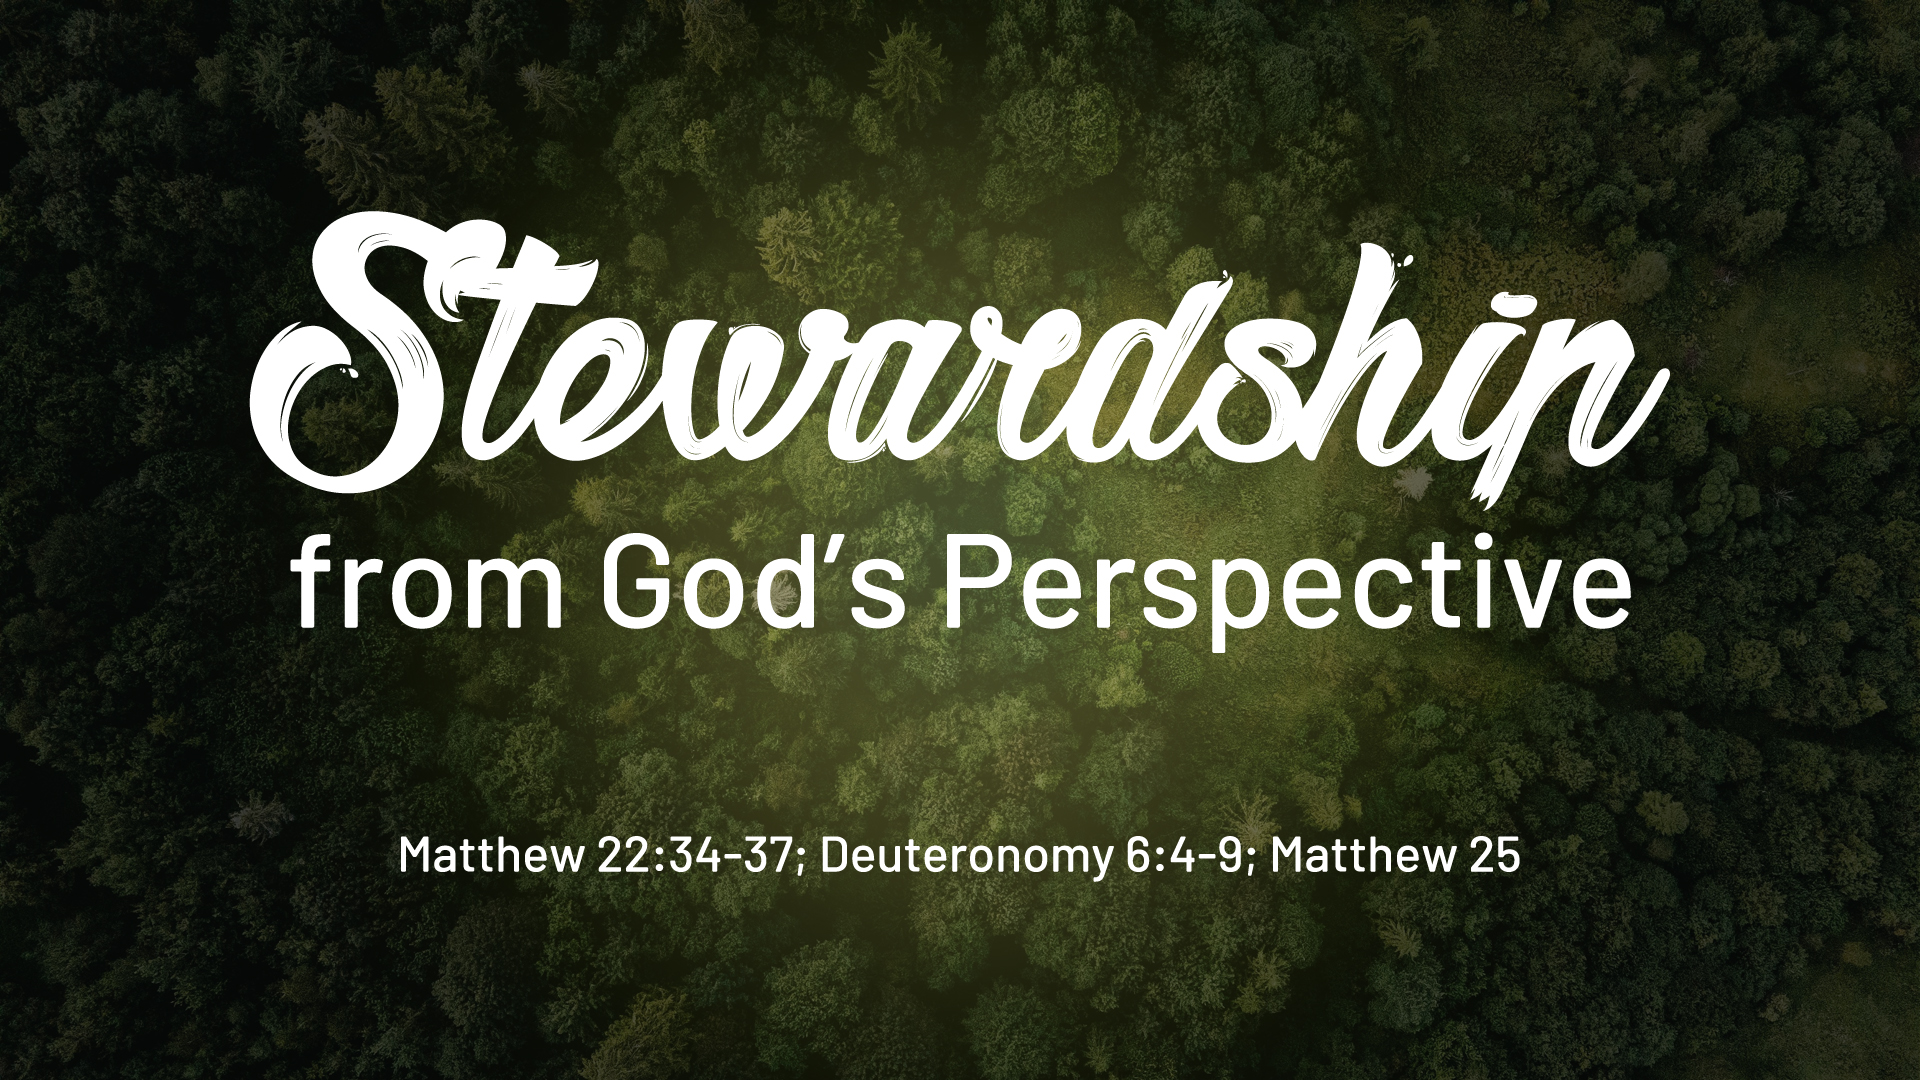 Stewardship from God’s Perspective